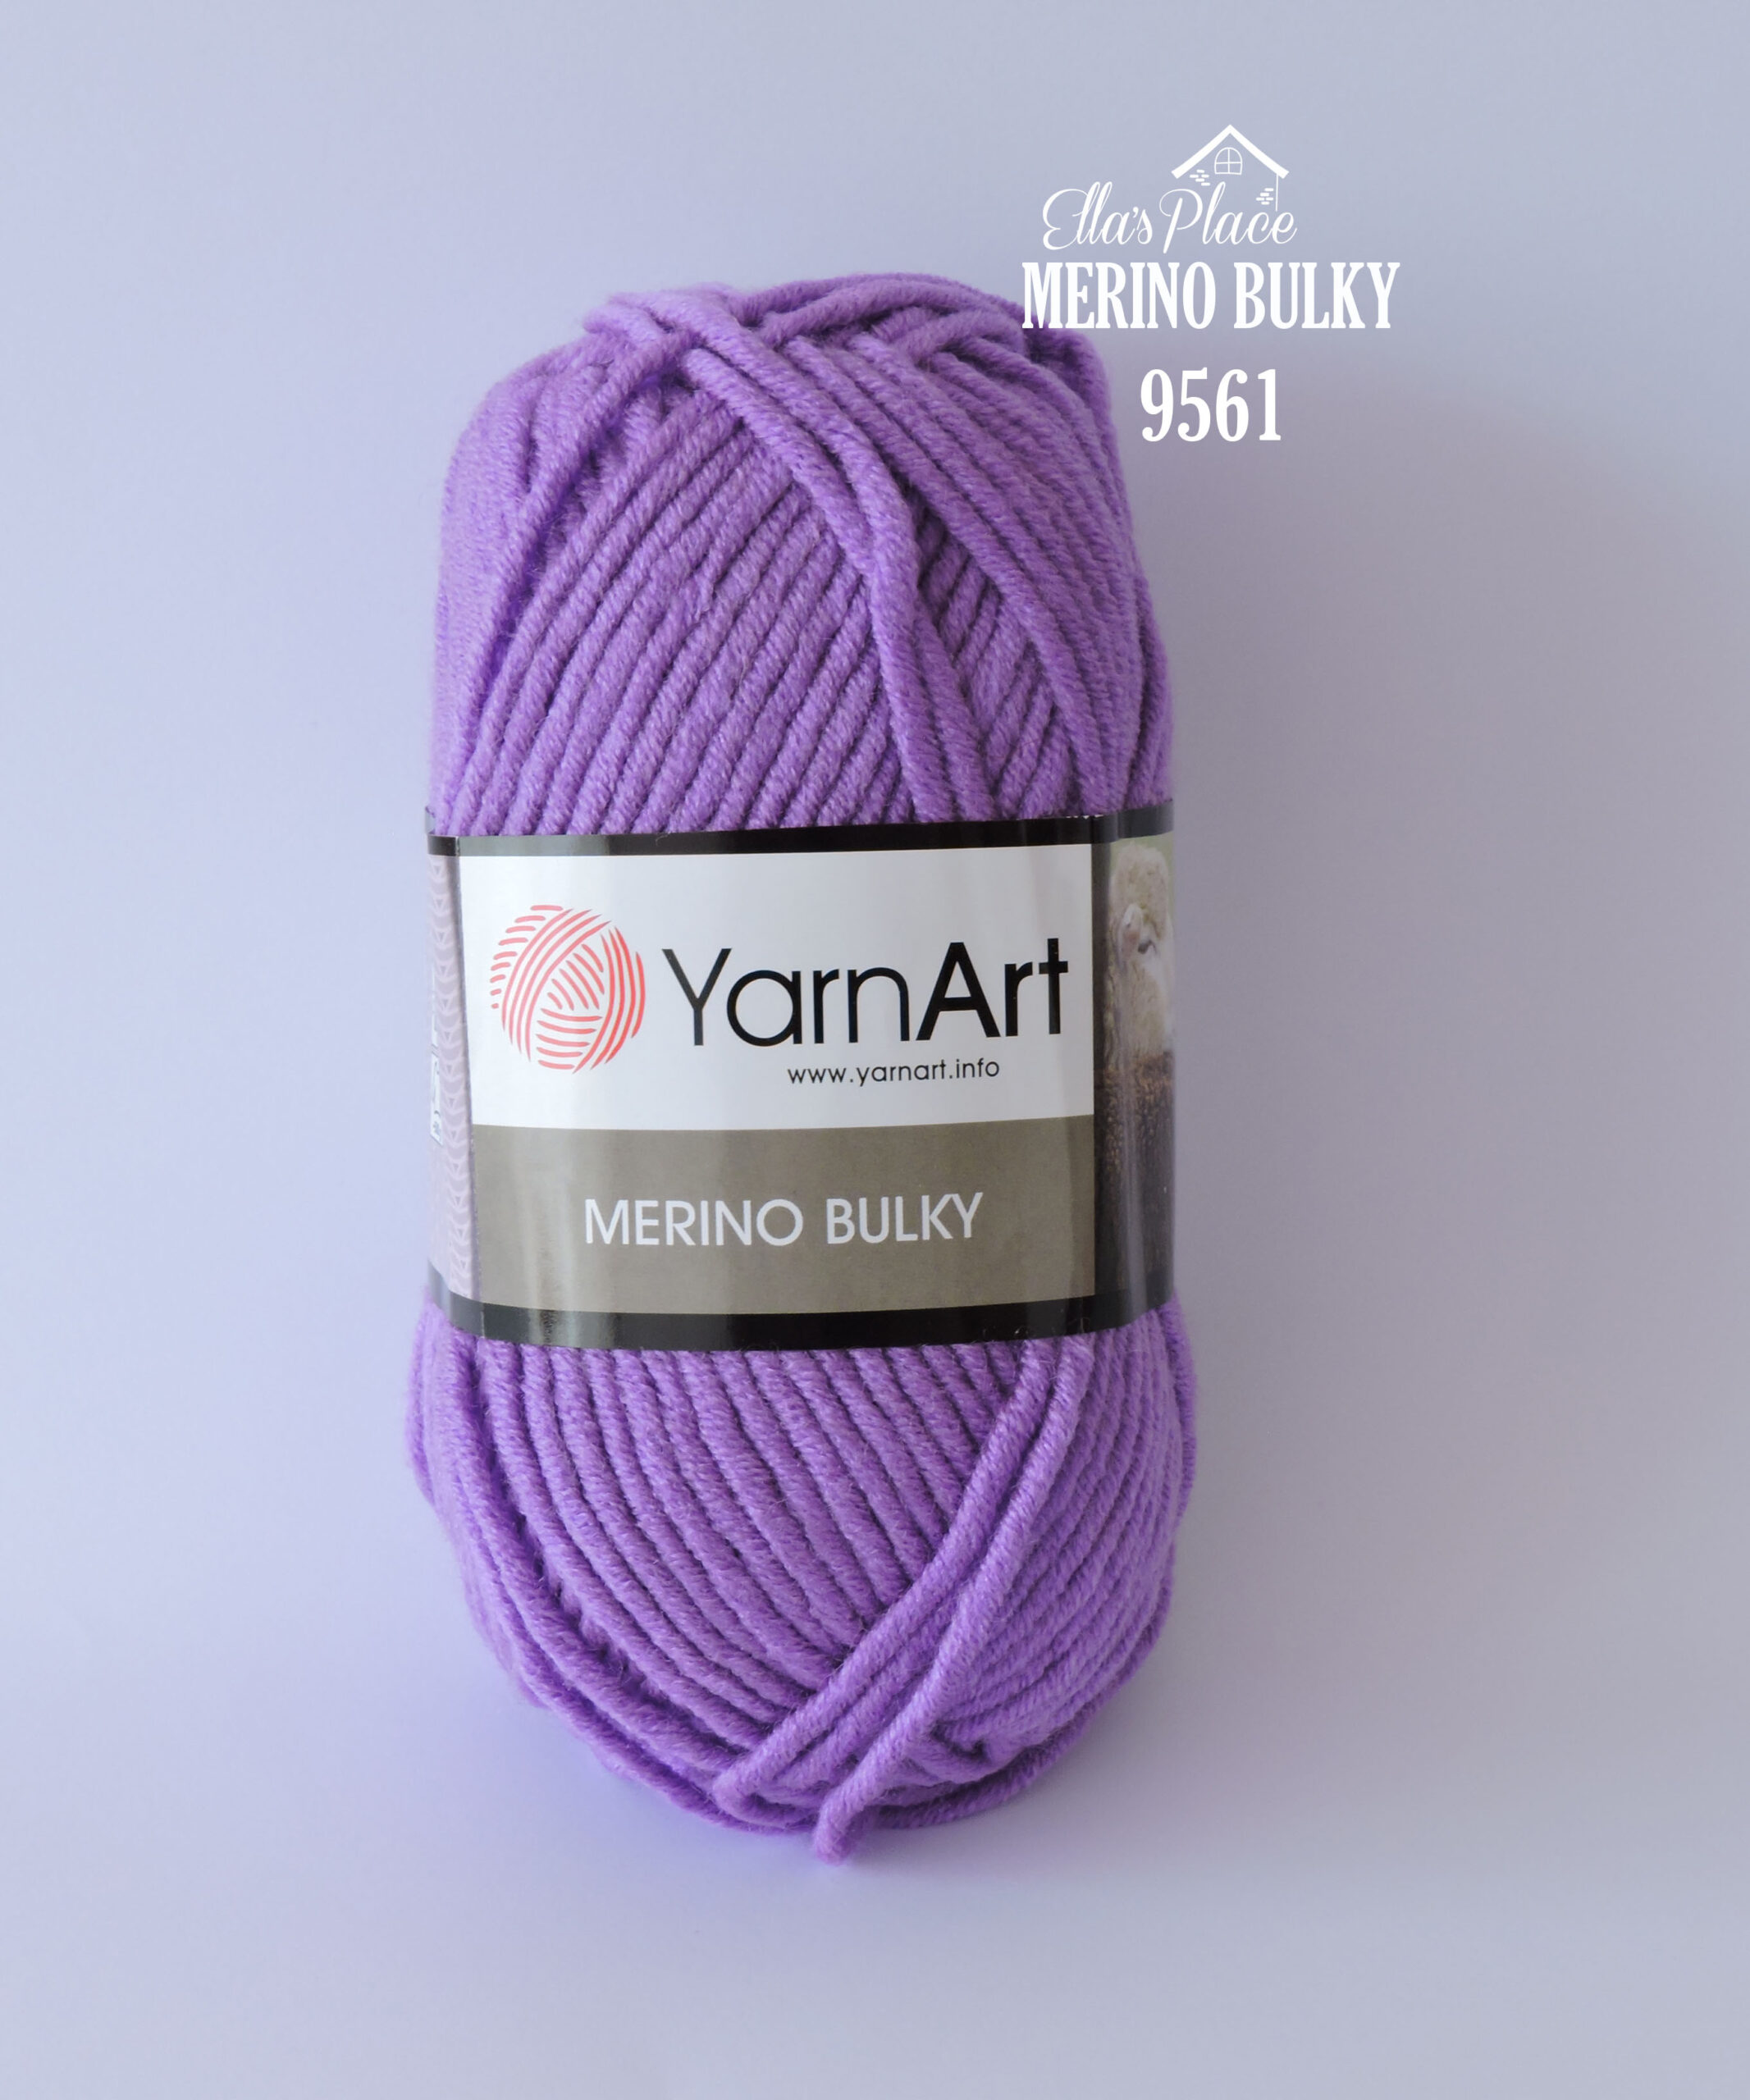 Discovery Northeast Be excited Fir de tricotat Merino Bulky, cod 9561 - Ella's Place